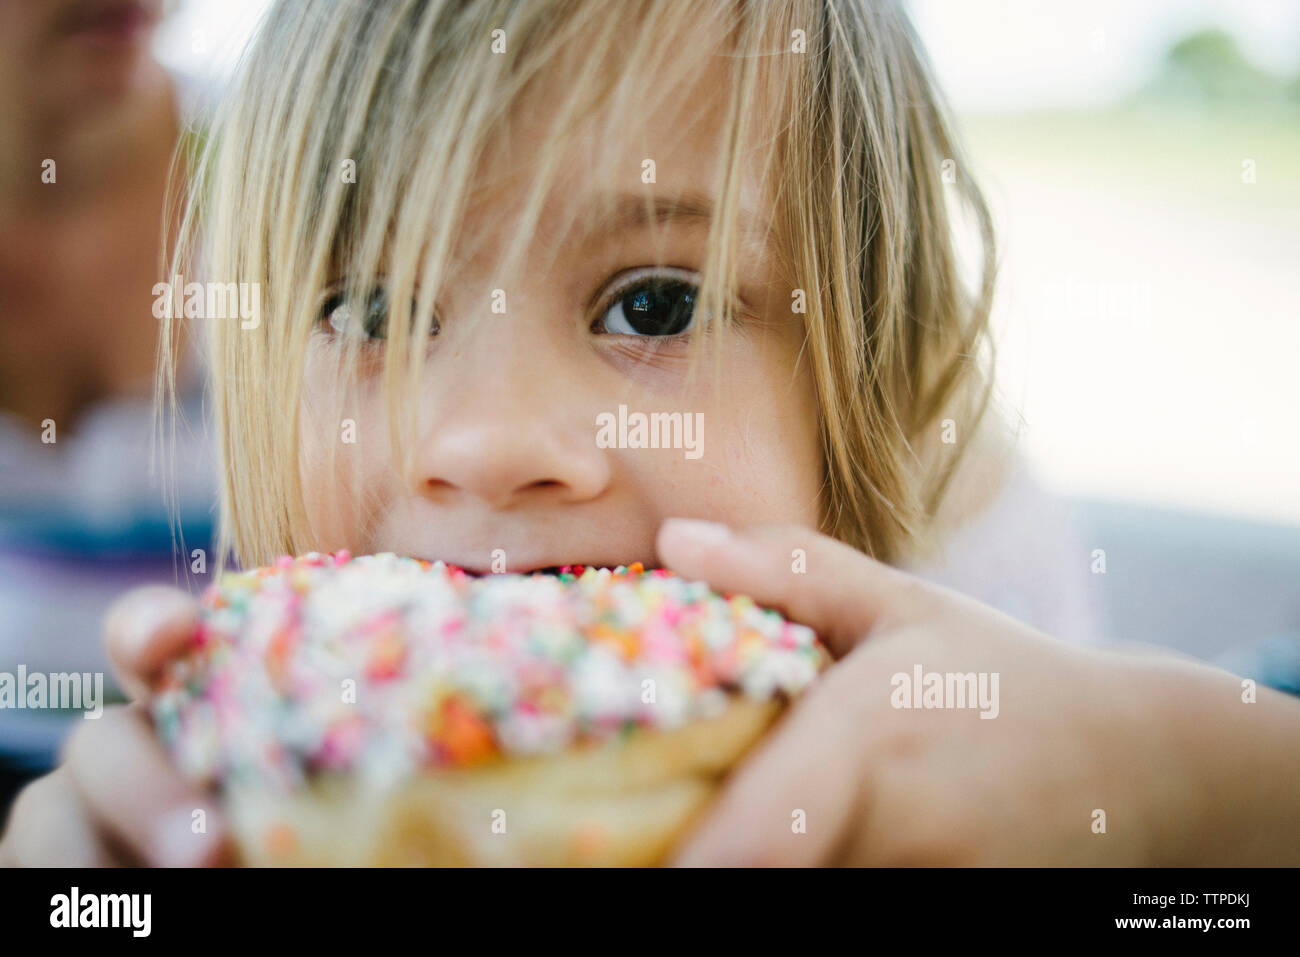 Portrait of cute girl eating donut outdoors Stock Photo